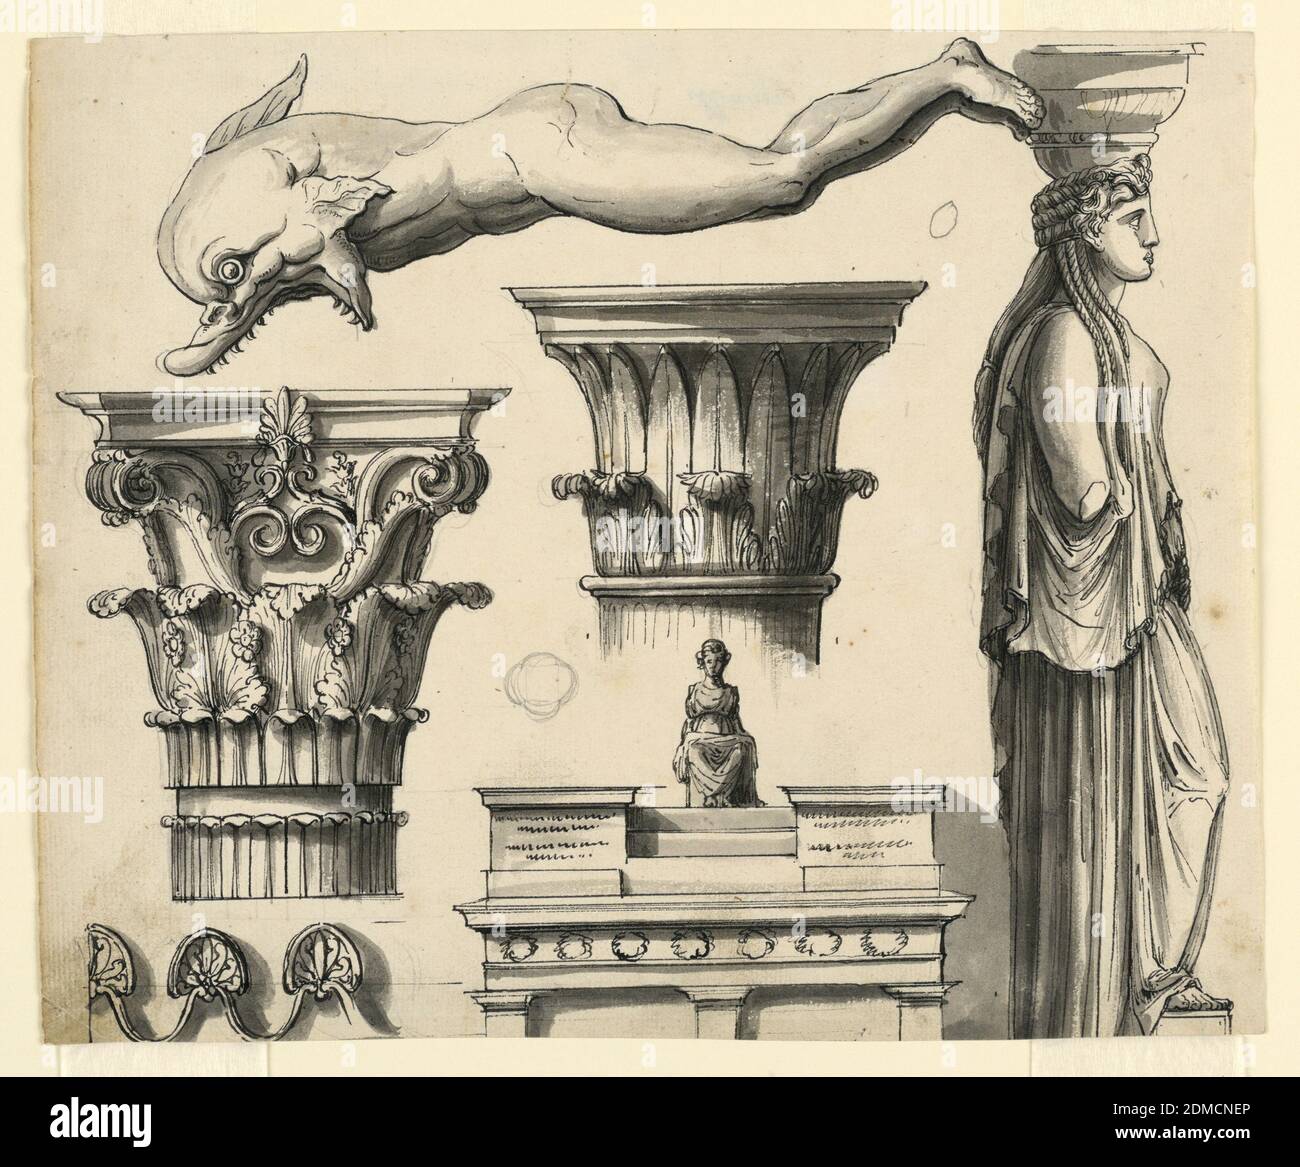 Classical and Pseudo-Classical Architectural Details, Romolo Achille Liverani, Italian, 1809 - 1872, Pen and black ink, brush and bistre, gray watercolor, graphite on paper, Horizontal rectangle. At top, shown from the side, a man with the head of a dolphin. At right, a caryatid, seen from the side. Two Corinthian capitals from the monument of Lysicrates and the Tower of the Winds in Athens. Below, at left is a cresting border with palmettes; at right, the upper part of a mausoleum with a sculpture of a seated woman., Italy, ca. 1840, architecture, Drawing, Drawing, Classical Stock Photo